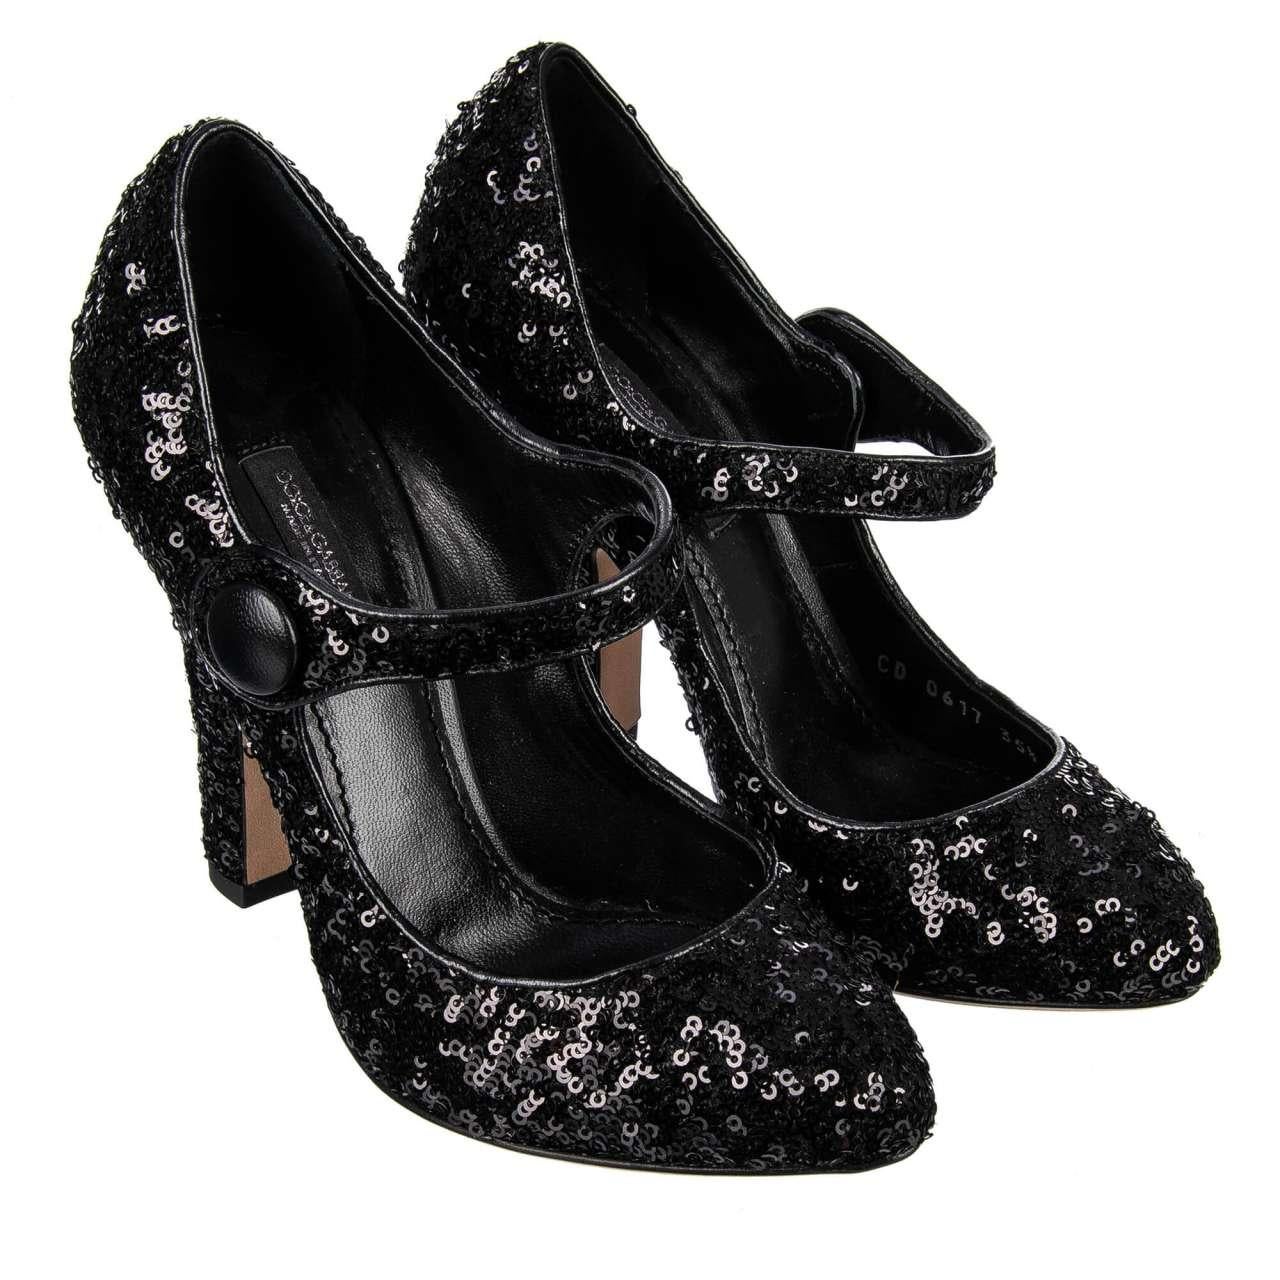 Dolce & Gabbana - Sequined Mary Janes VALLY Black EUR 35.5 For Sale 1